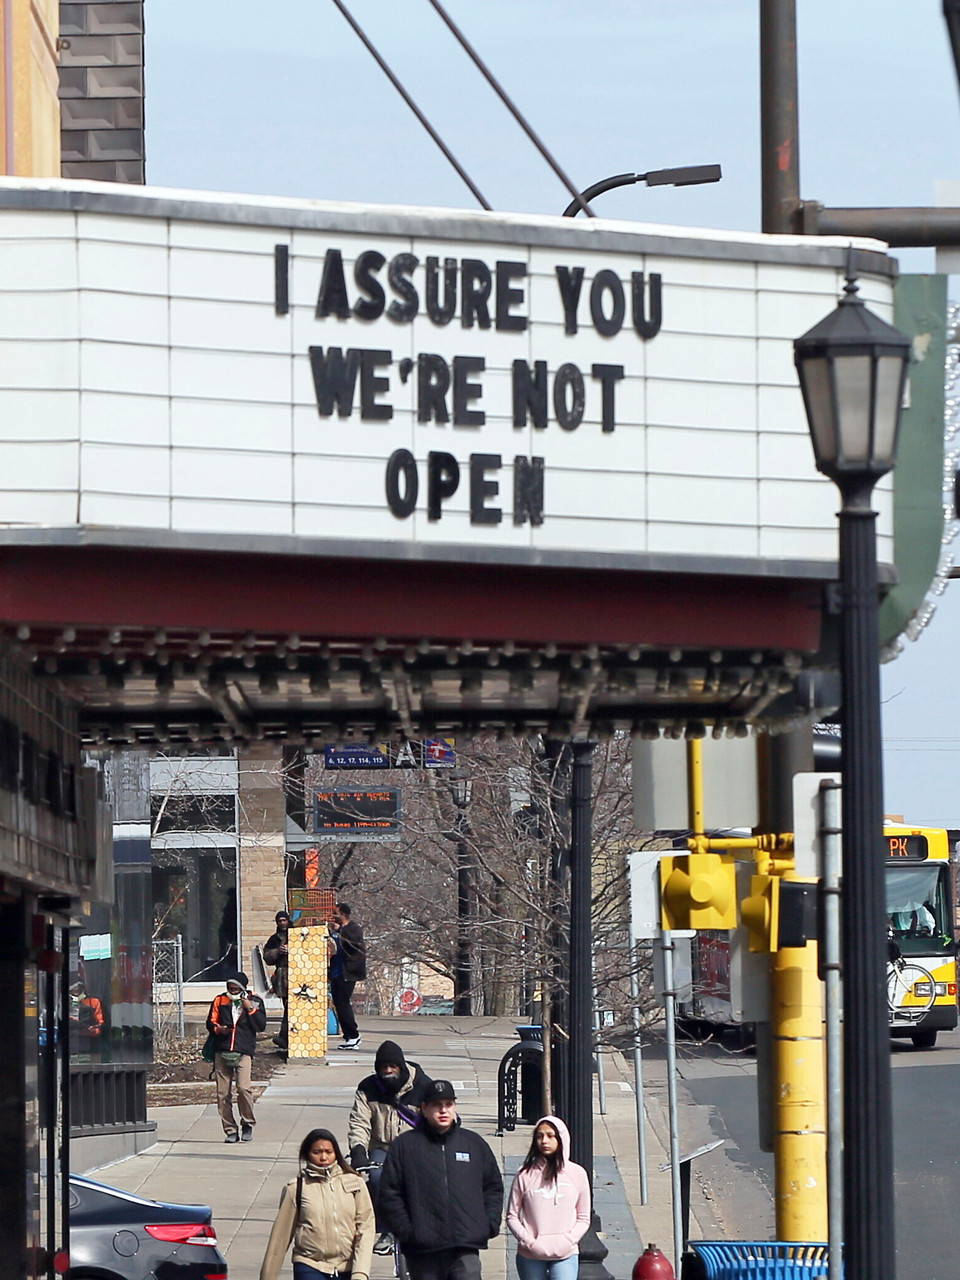 In Shutdown A Glimpse Of Life Without Movie Theaters Wach